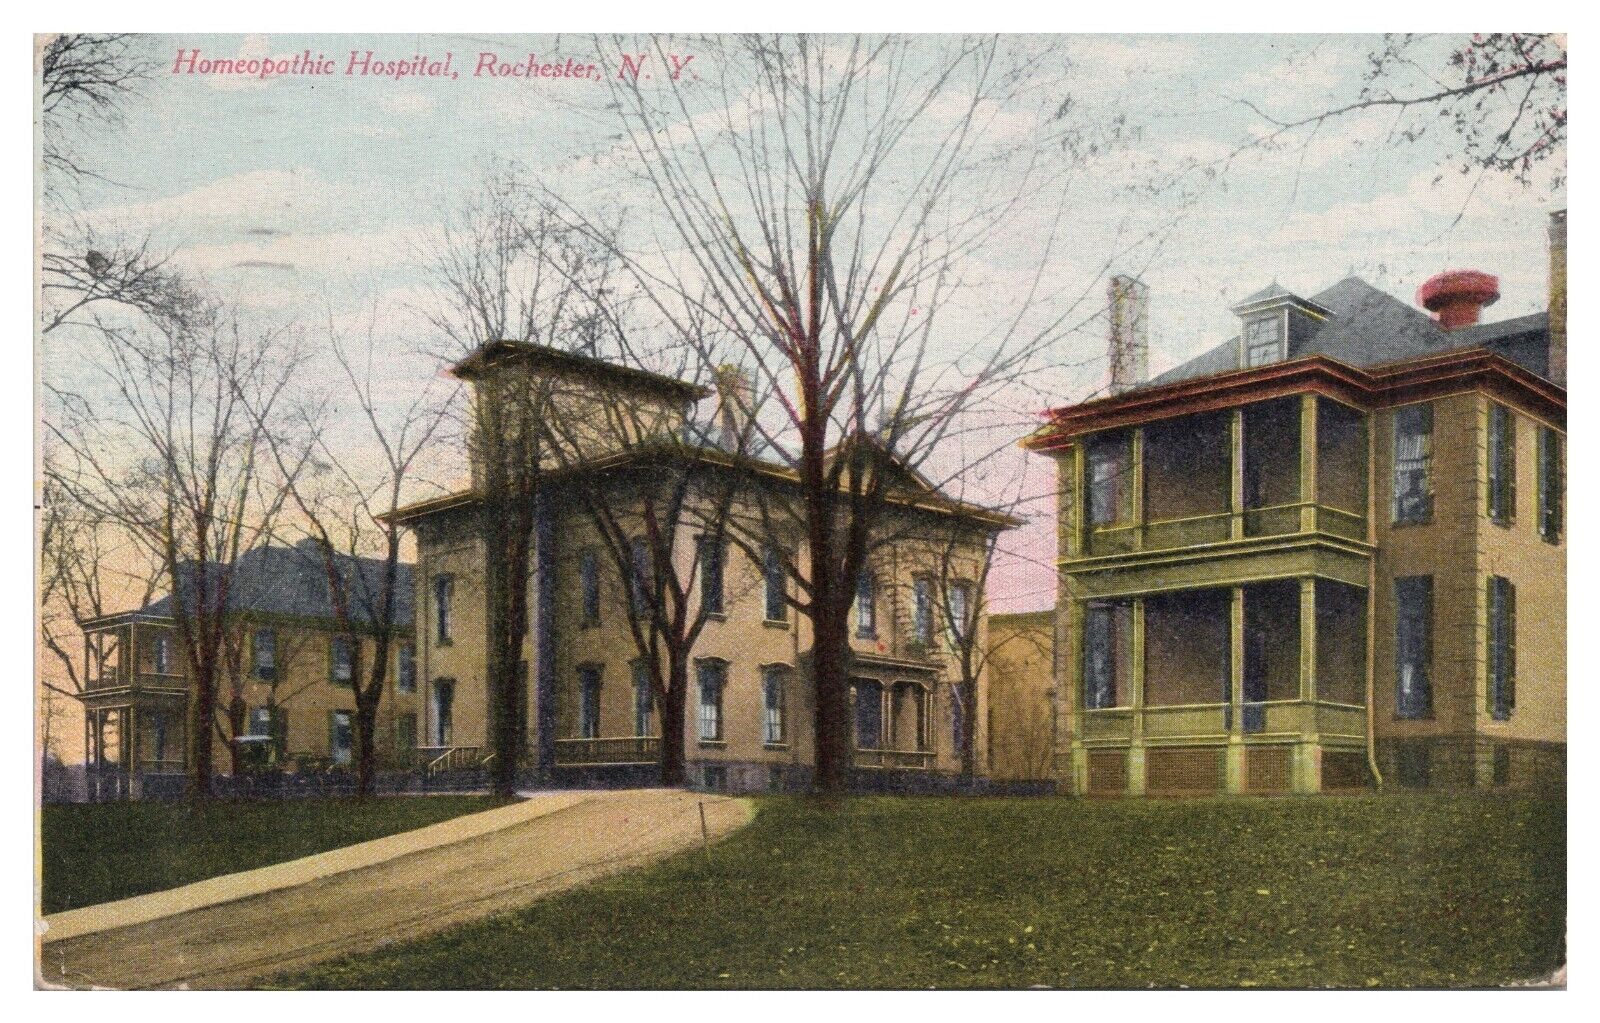 Homeopathic Hospital Rochester NY Vintage Postcard c1913